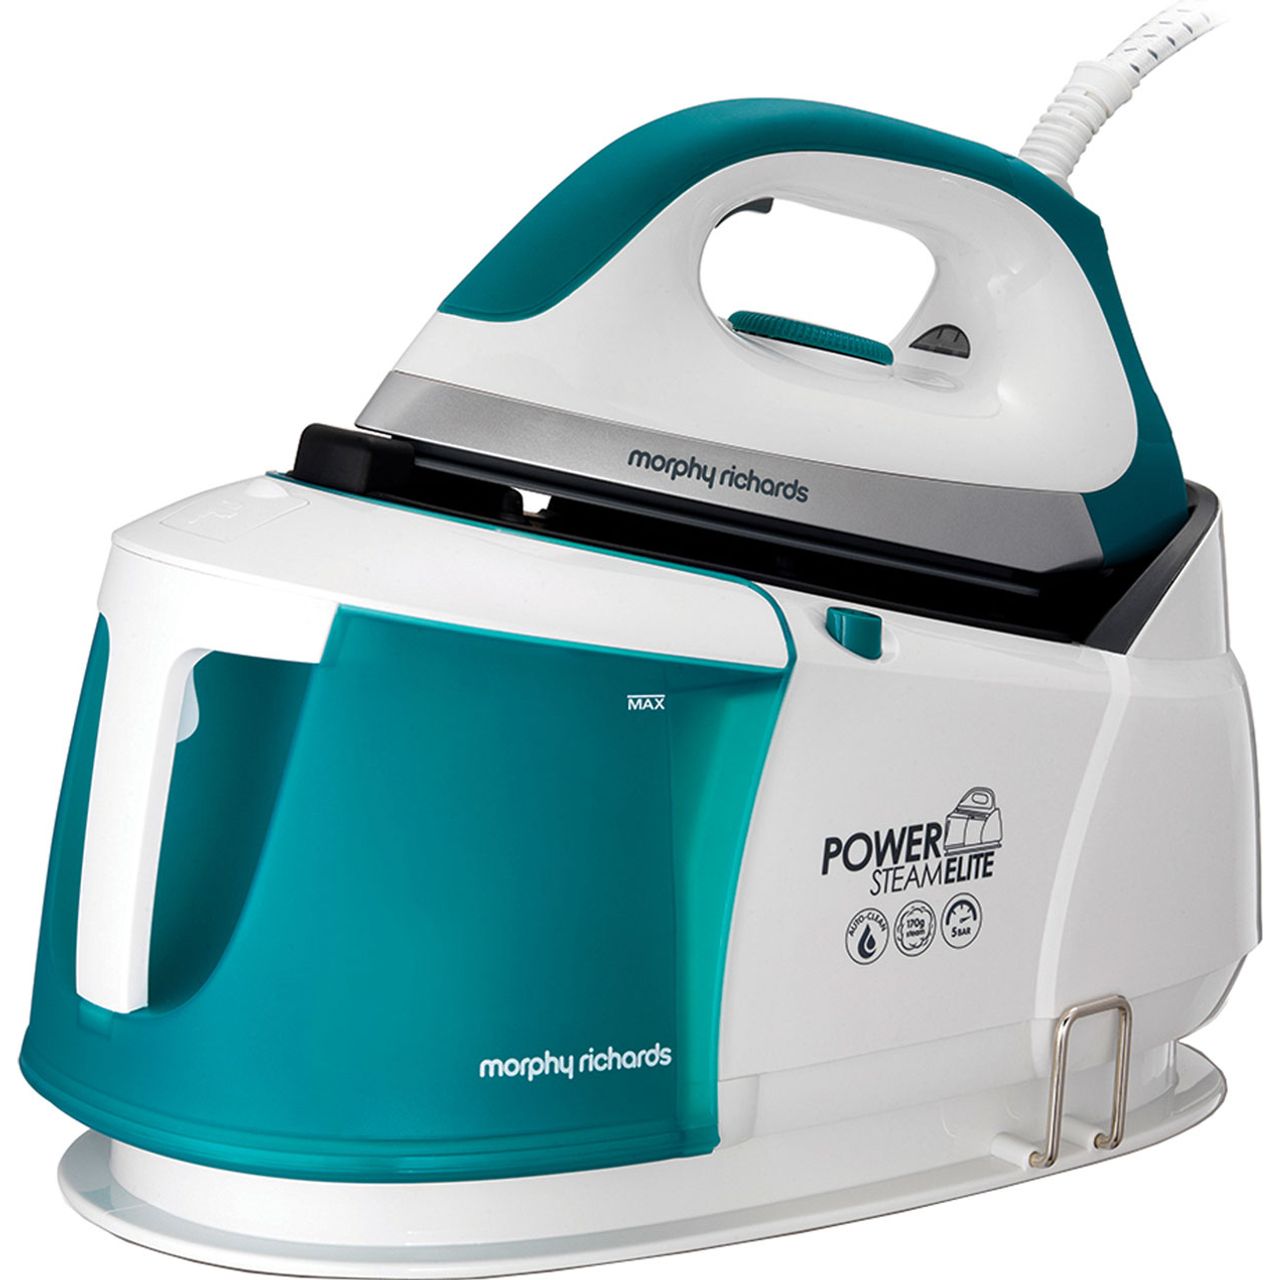 Morphy Richards Power Steam Elite With AutoClean 332014 Pressurised Steam Generator Iron Review